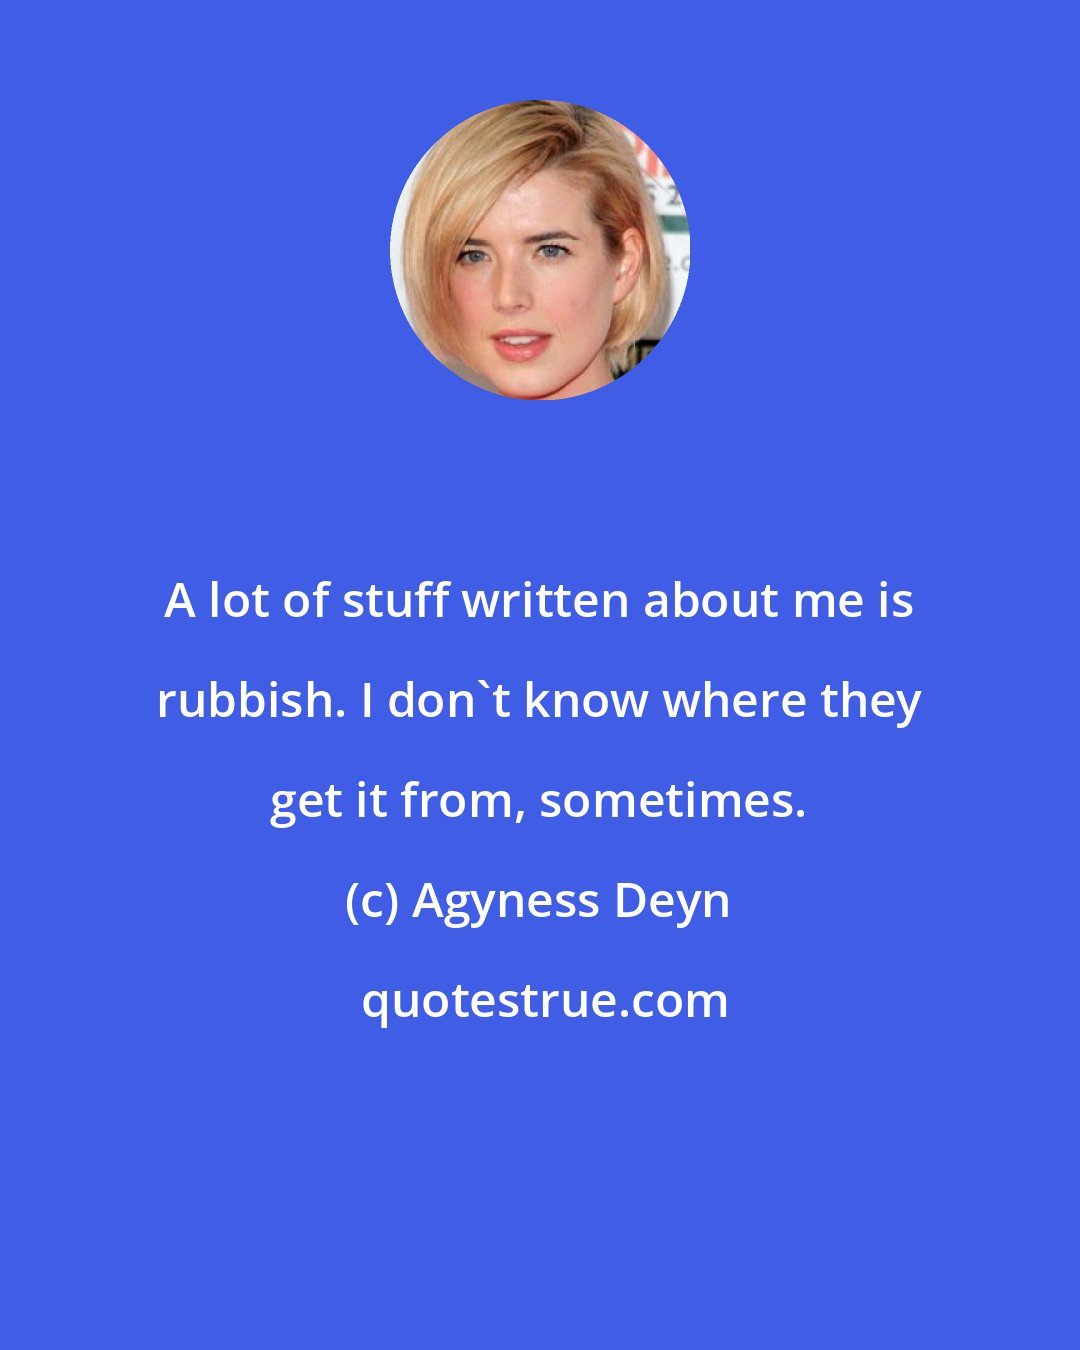 Agyness Deyn: A lot of stuff written about me is rubbish. I don't know where they get it from, sometimes.